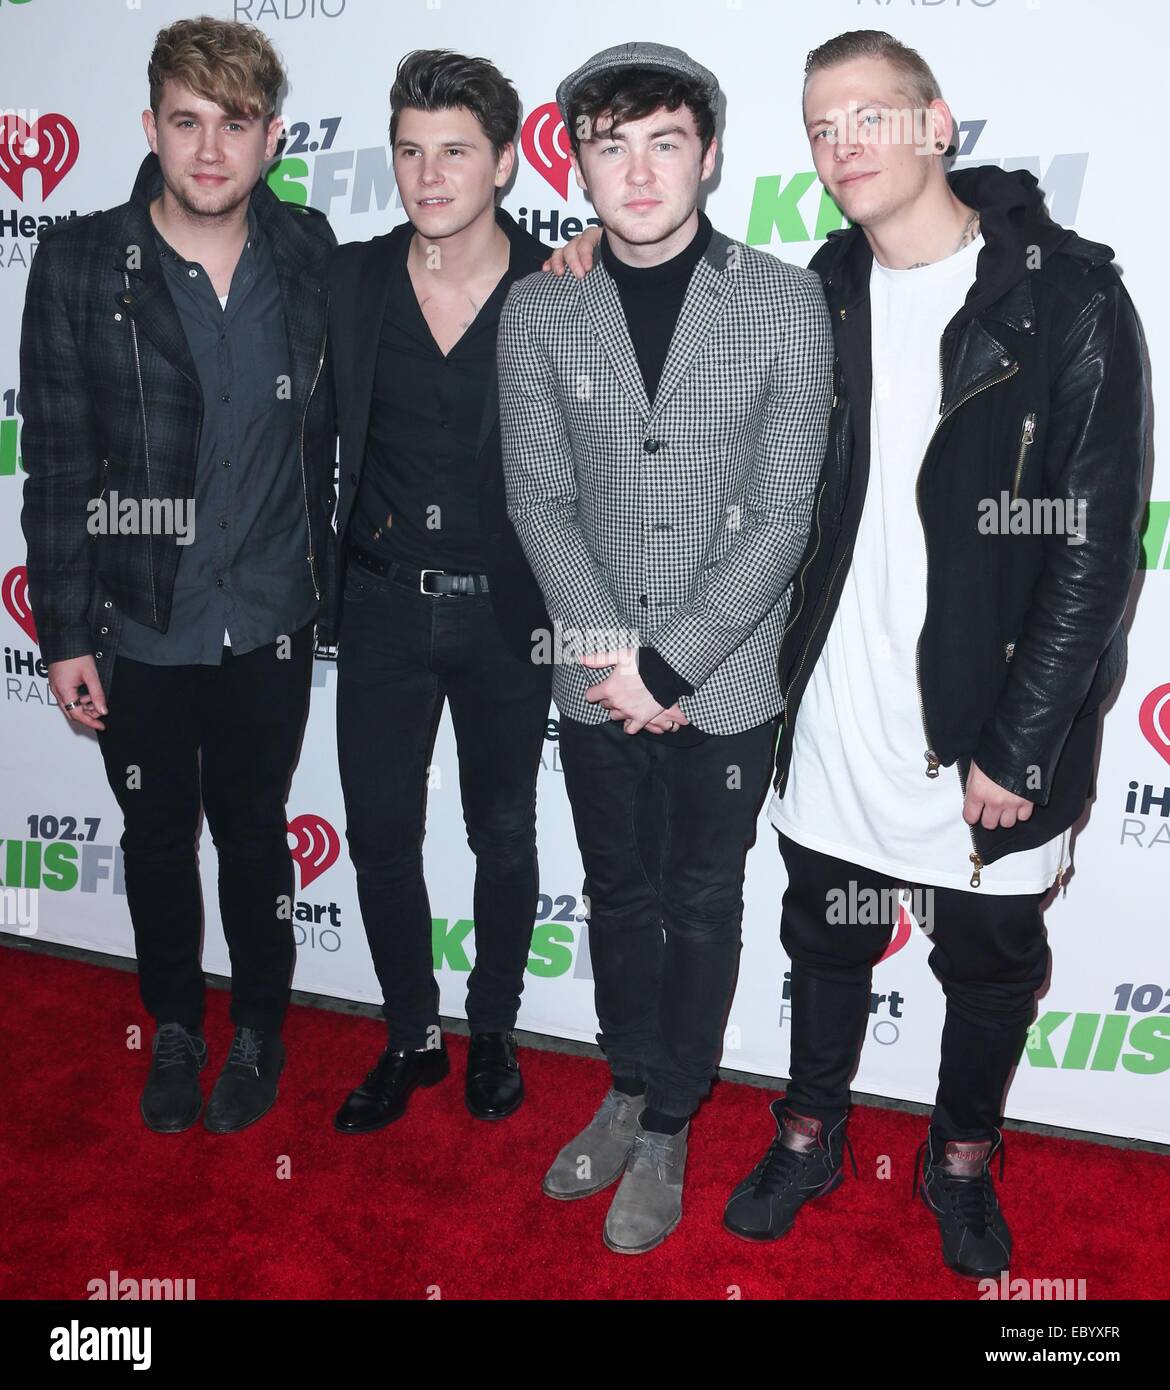 Danny Wilkin, Charley Bagnall, Jake Roche, and Lewi Morgan, Rixton in the press room for KIIS FM's Jingle Ball 2013 Powered by LINE – PRESS ROOM, Staples Center, Los Angeles, CA December 5, 2014. Photo By: Xavier Collin/Everett Collection Stock Photo